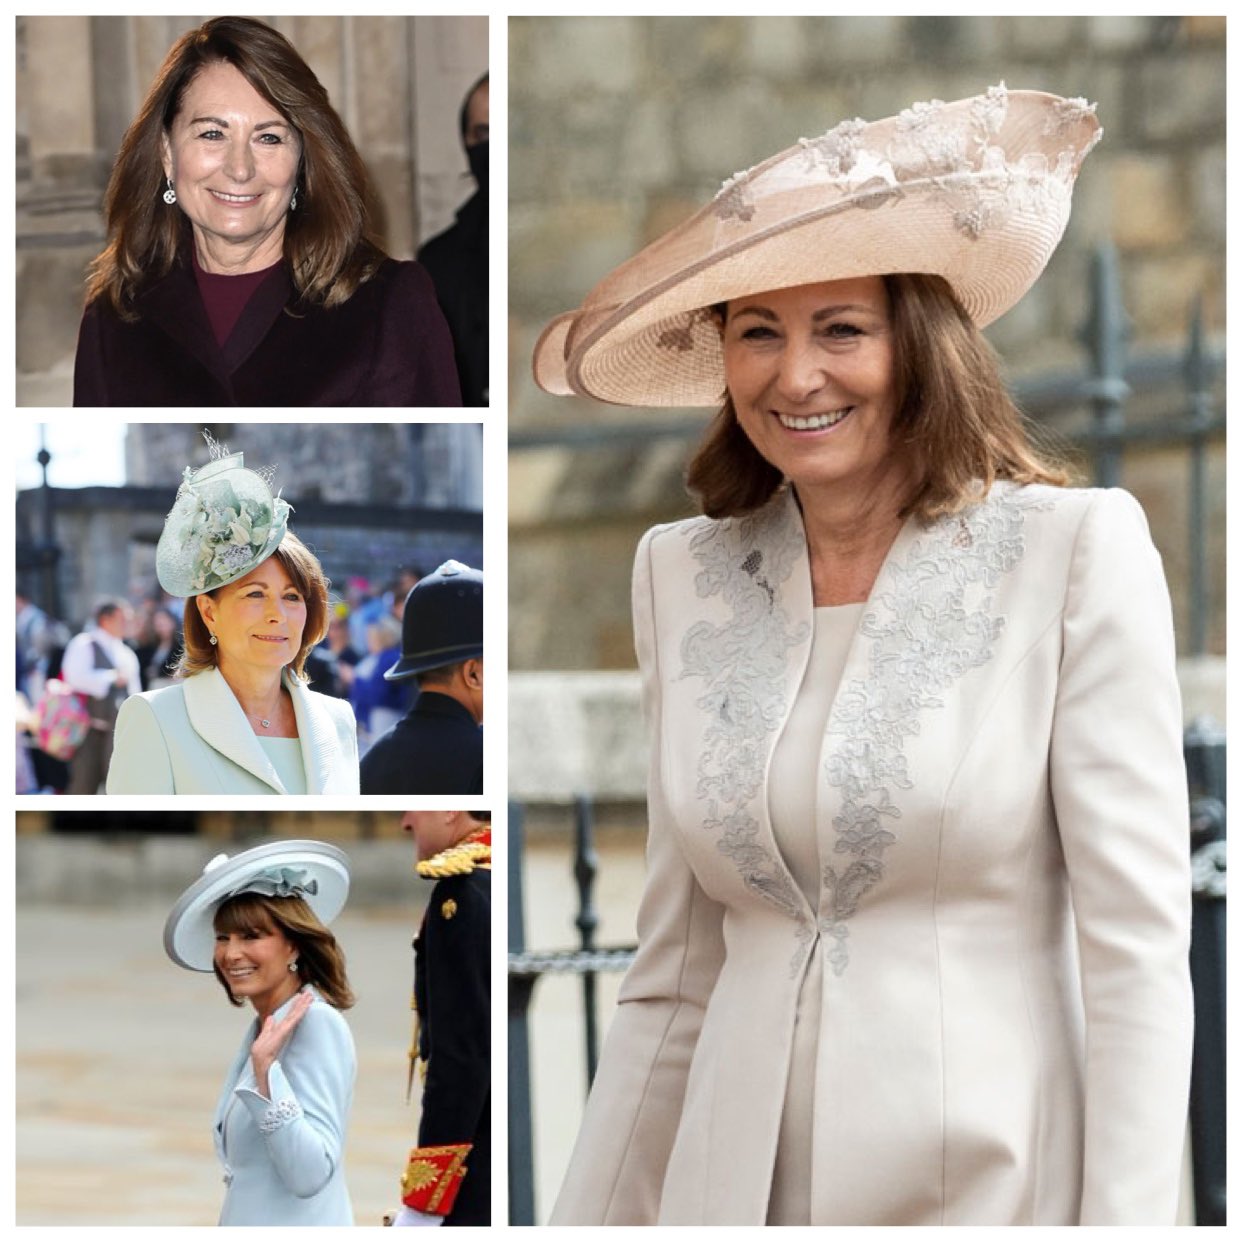 Wishing the lovely Carole Middleton, a very happy birthday 